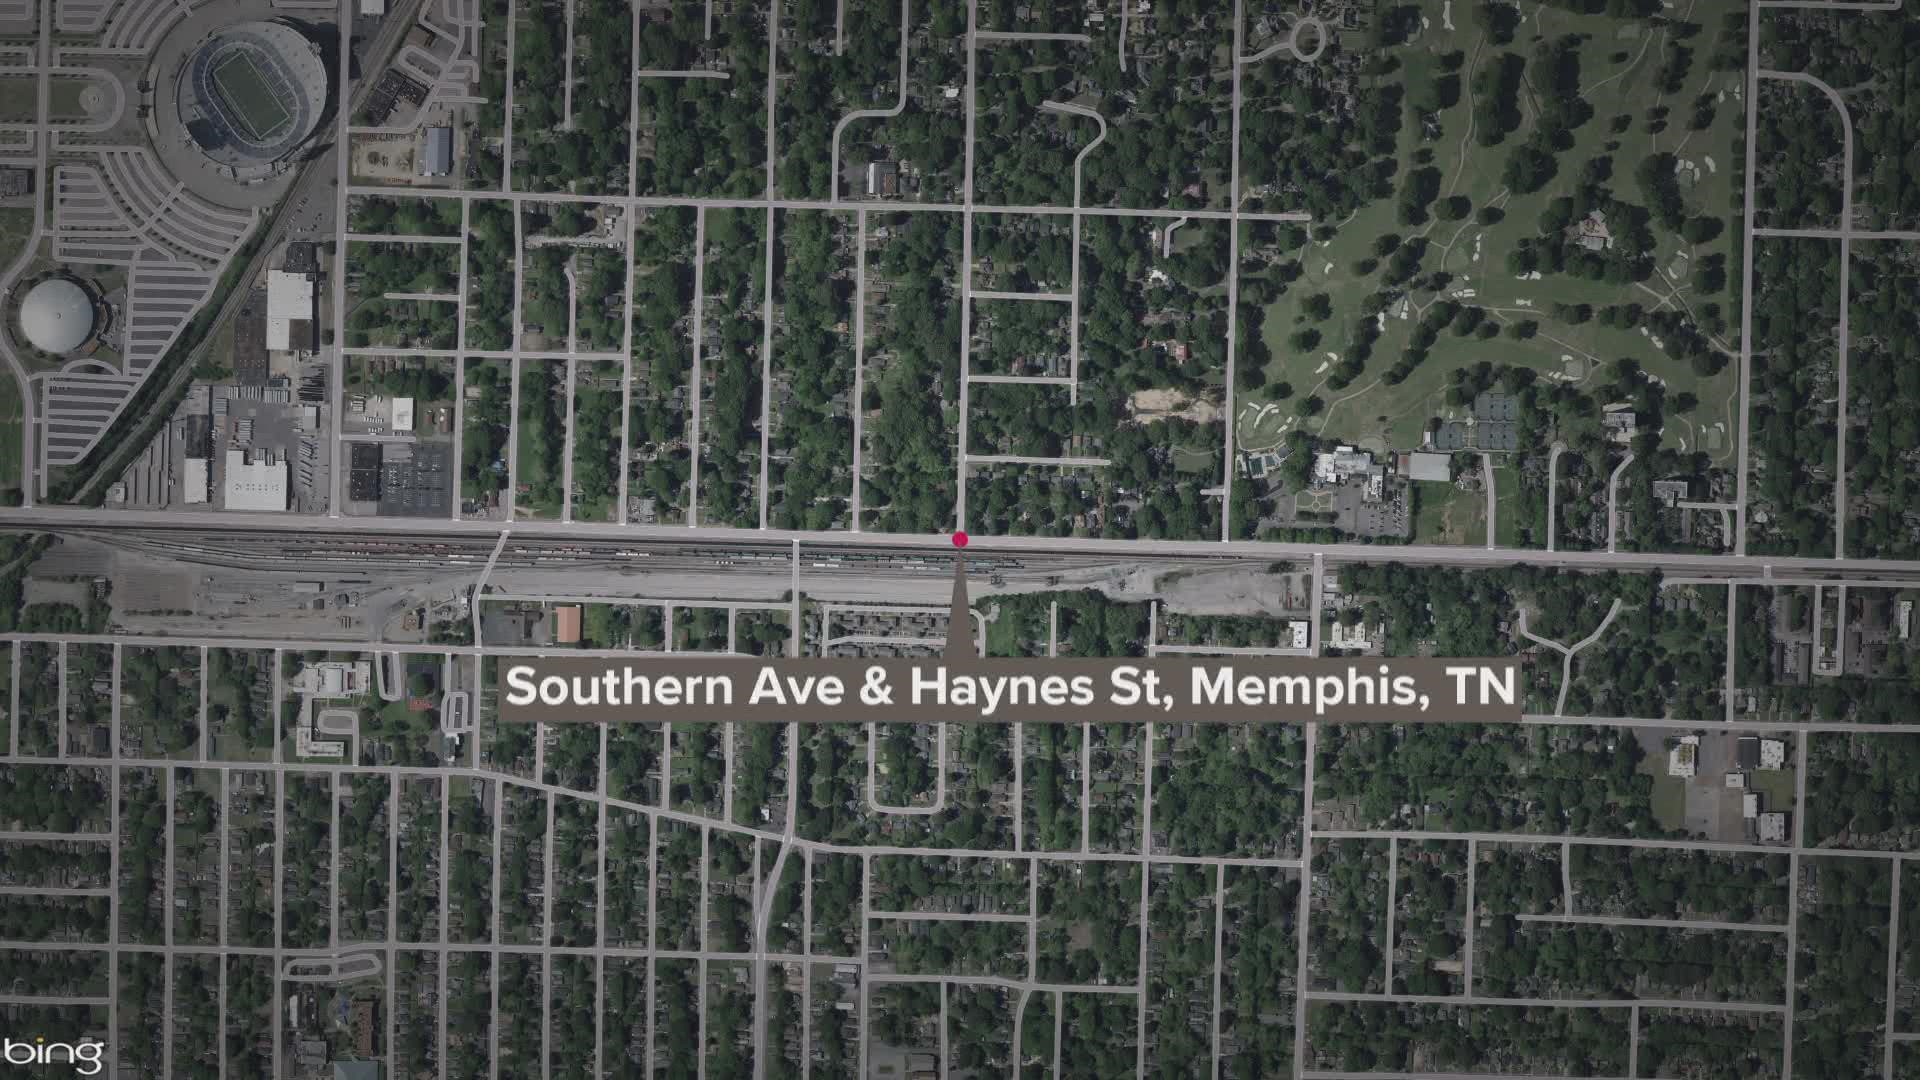 Memphis Police said the incident happened in the area of Southern Avenue and Haynes Street.